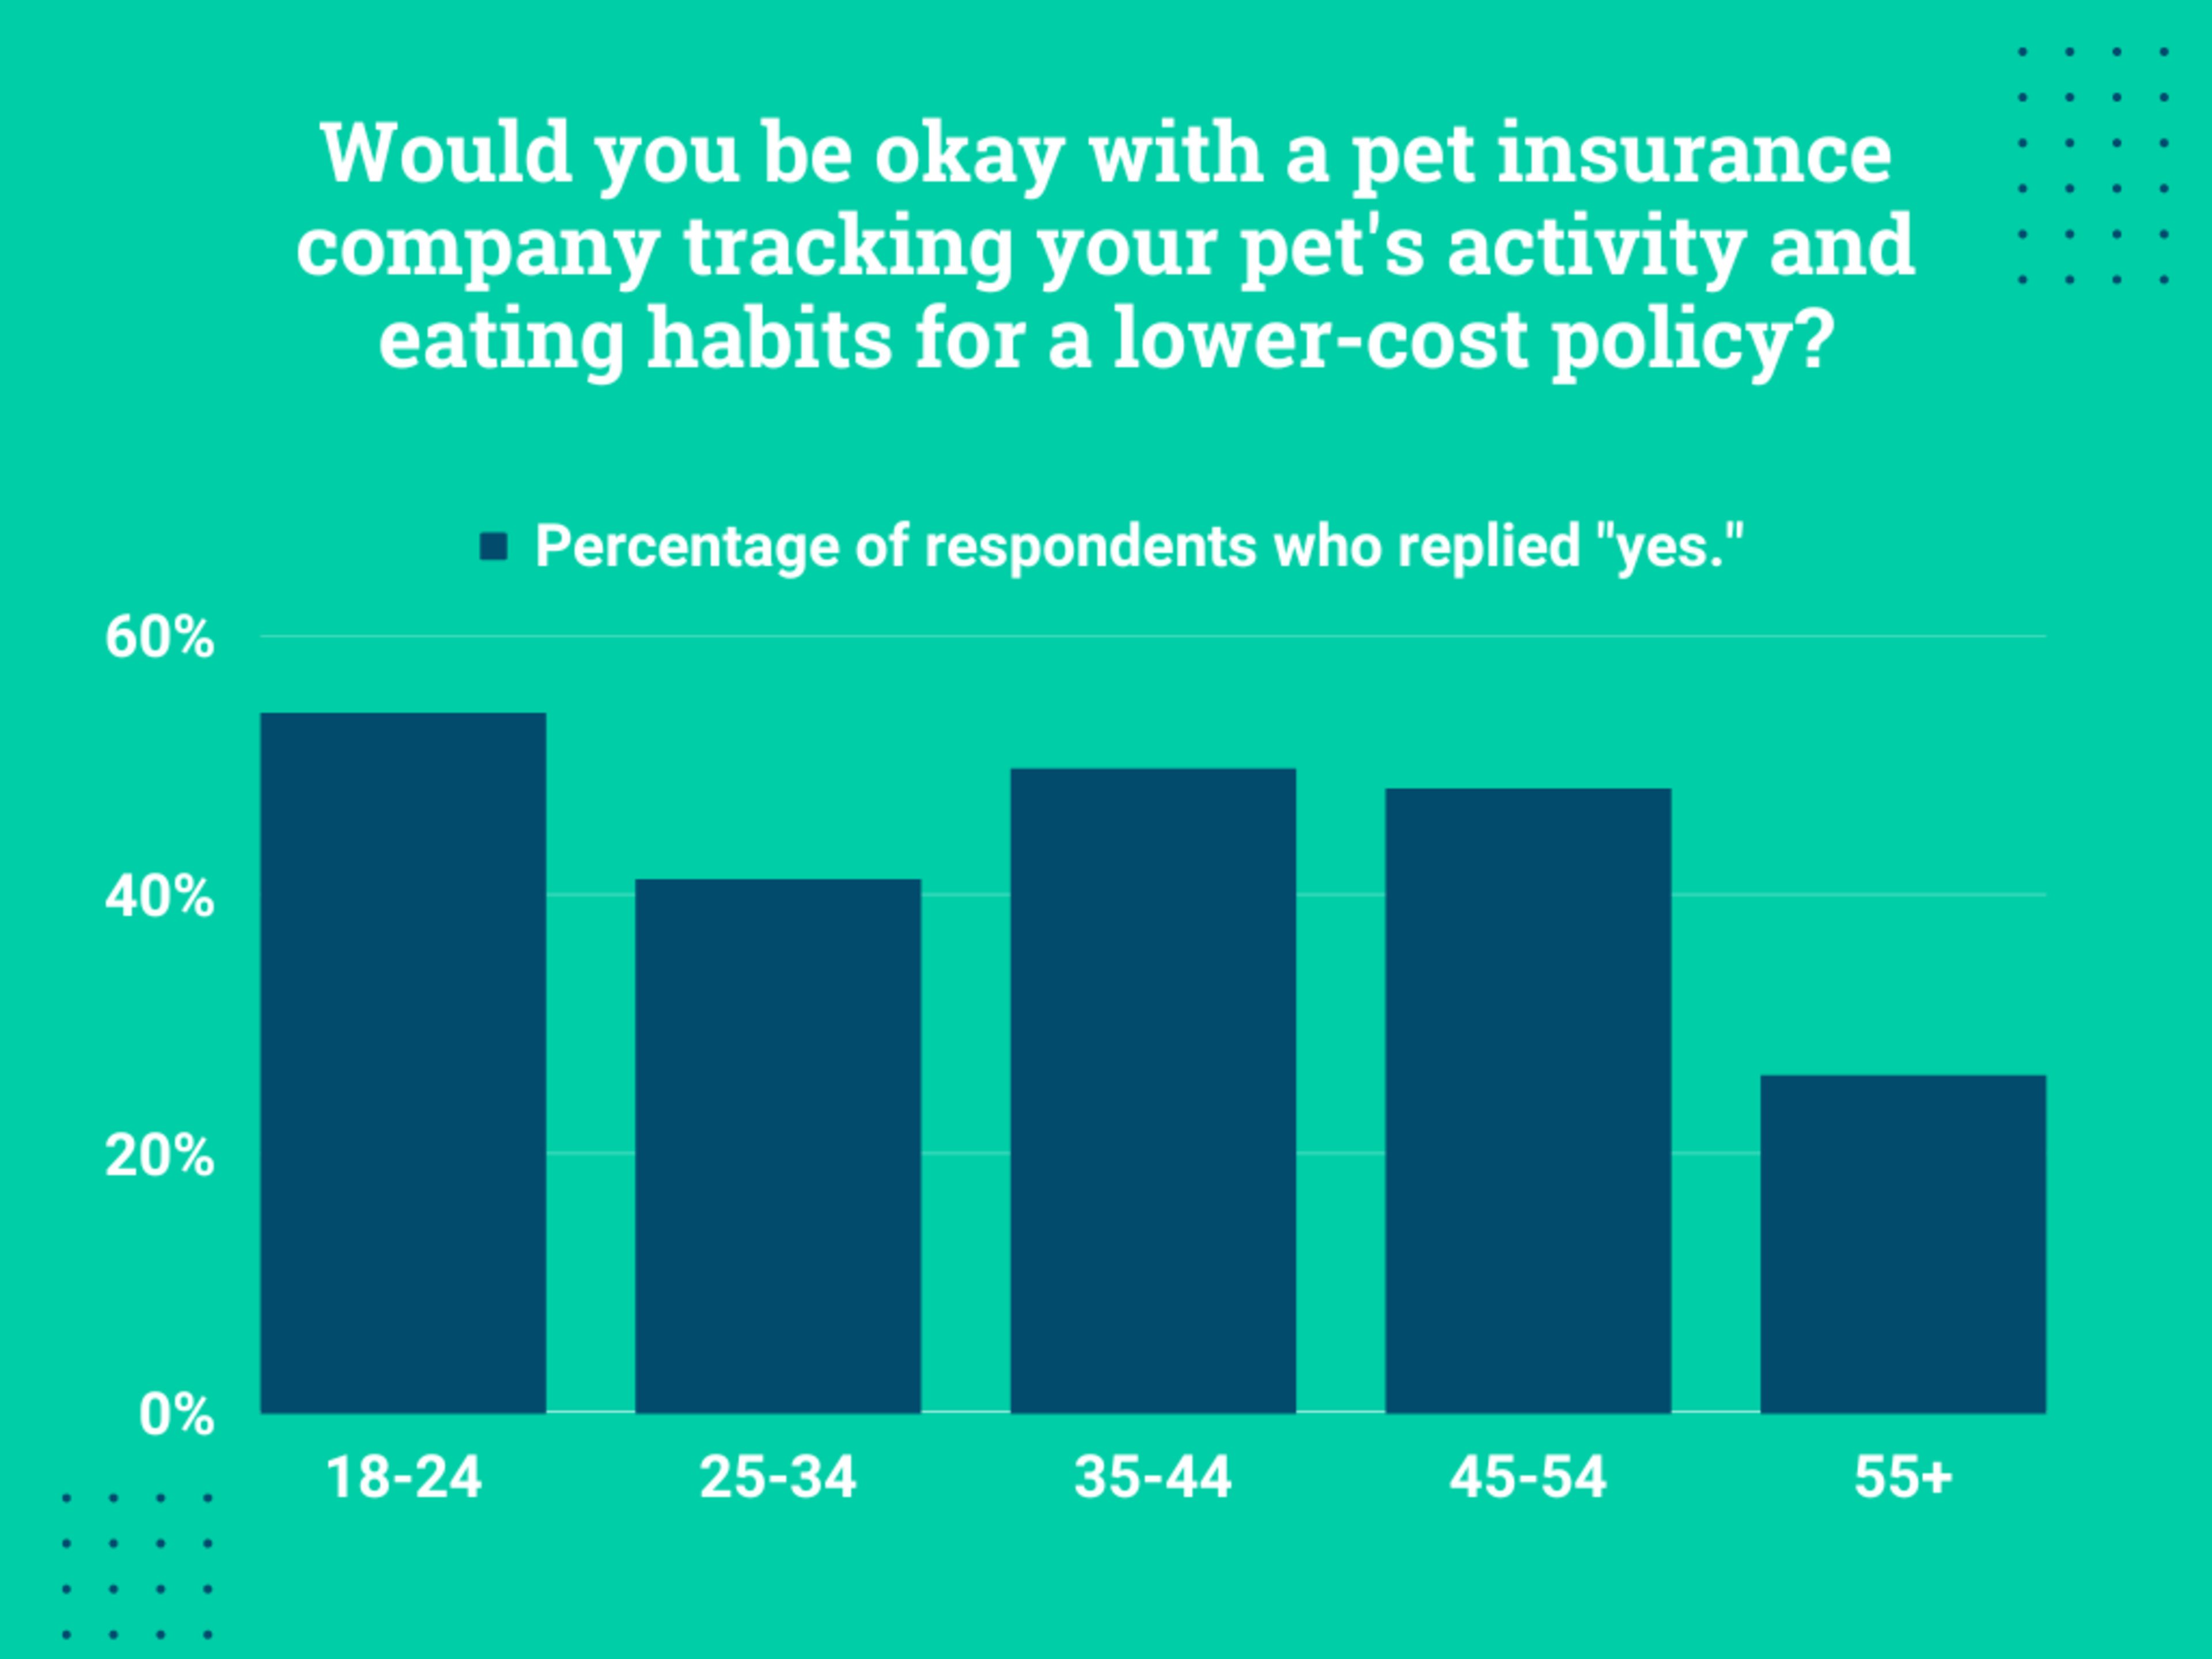 Would you be okay with a pet insurance company tracking your pet-s activity and eating habits for a lower-cost policy